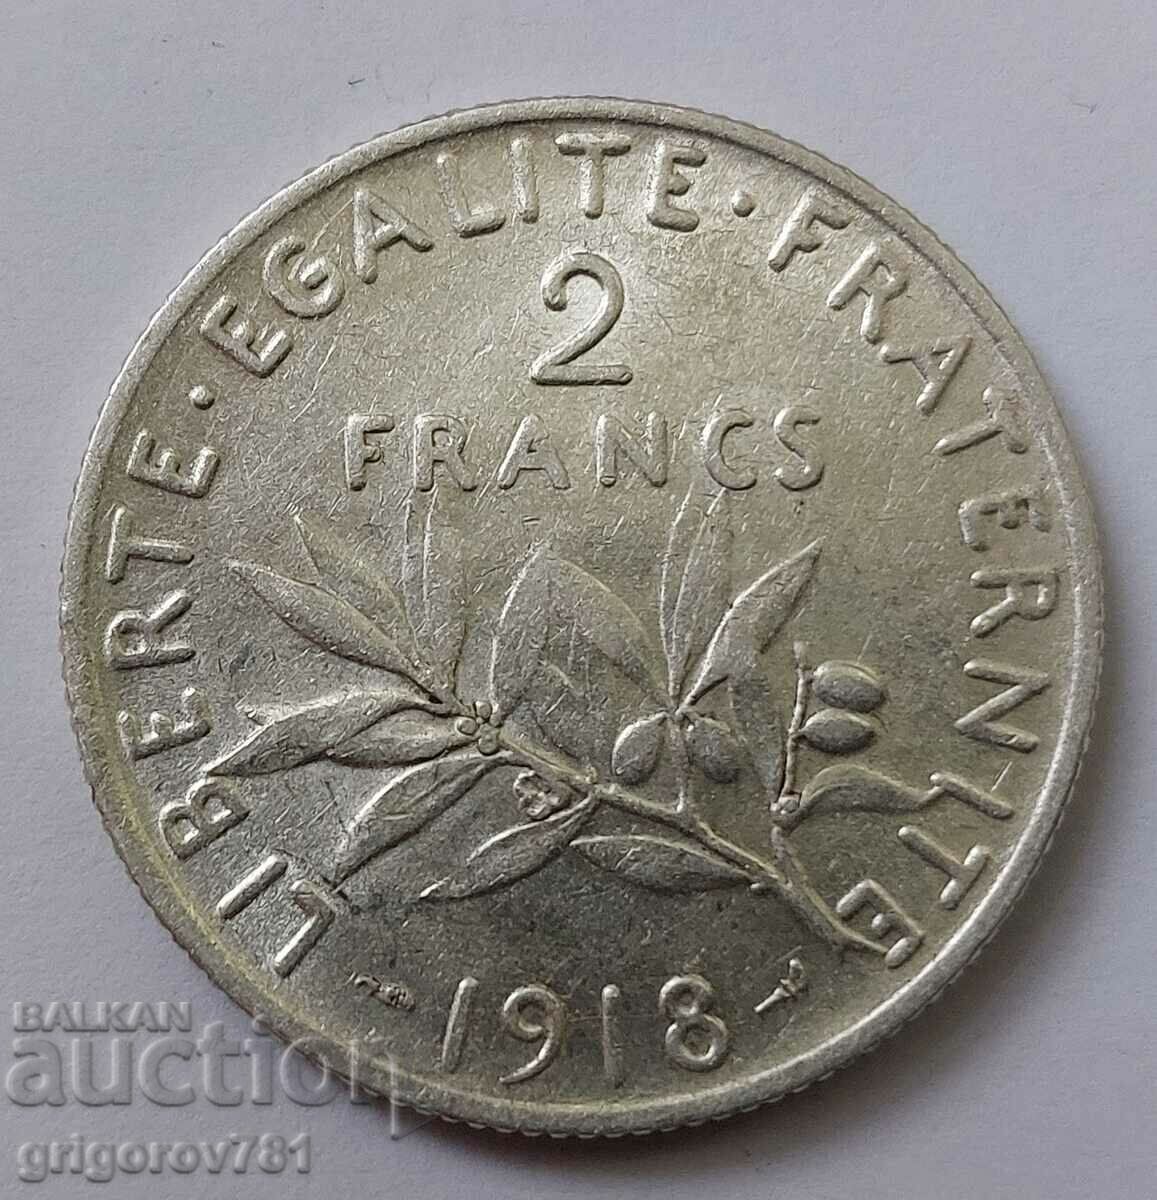 2 Francs Silver France 1918 - Silver Coin #54